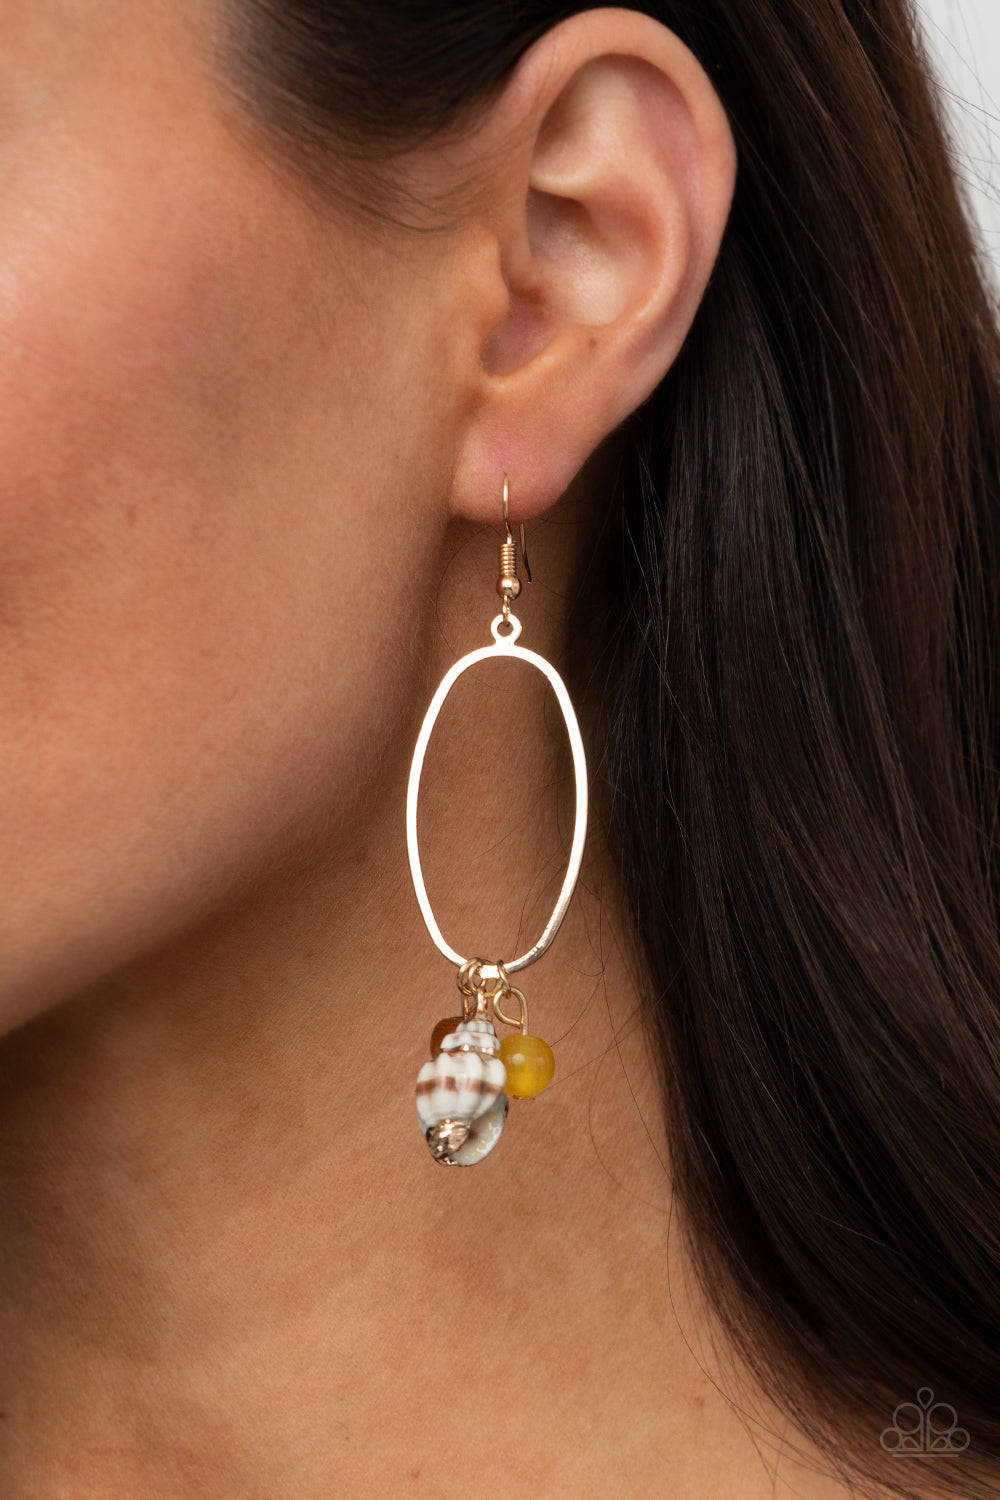 Golden Grotto - Yellow/Gold earrings